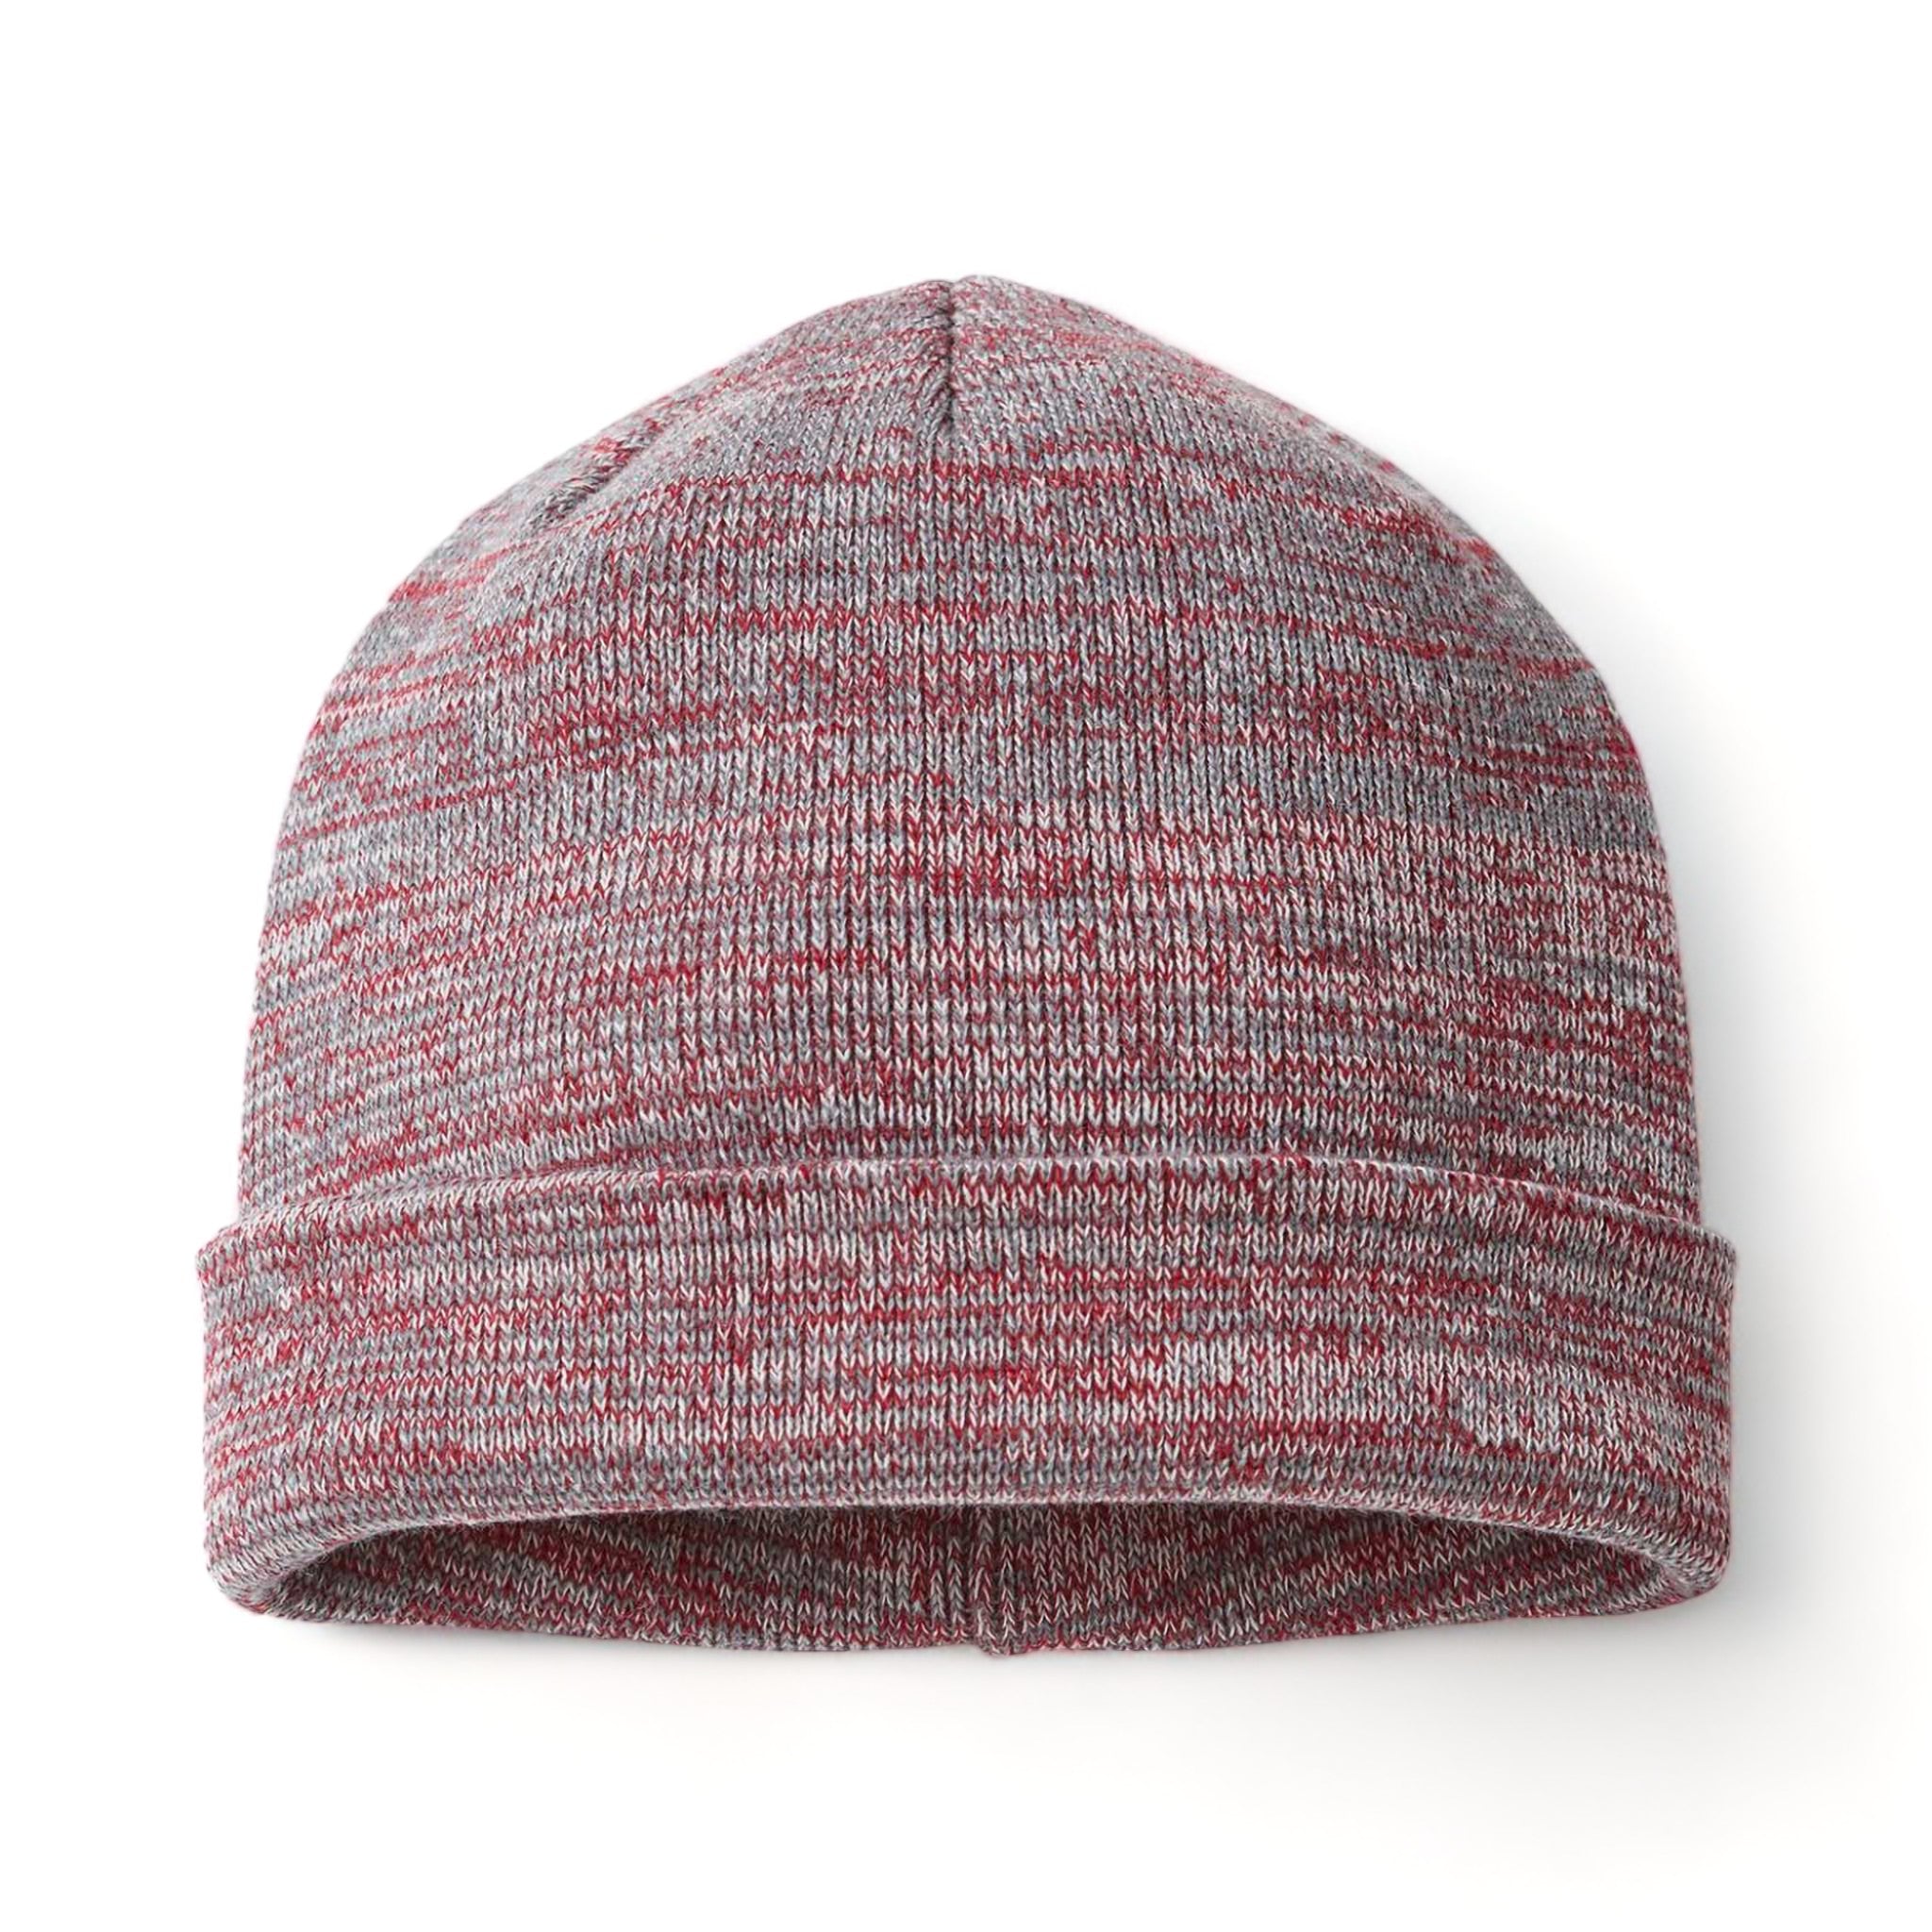 Front view of Richardson 130 custom hat in red, grey and charcoal